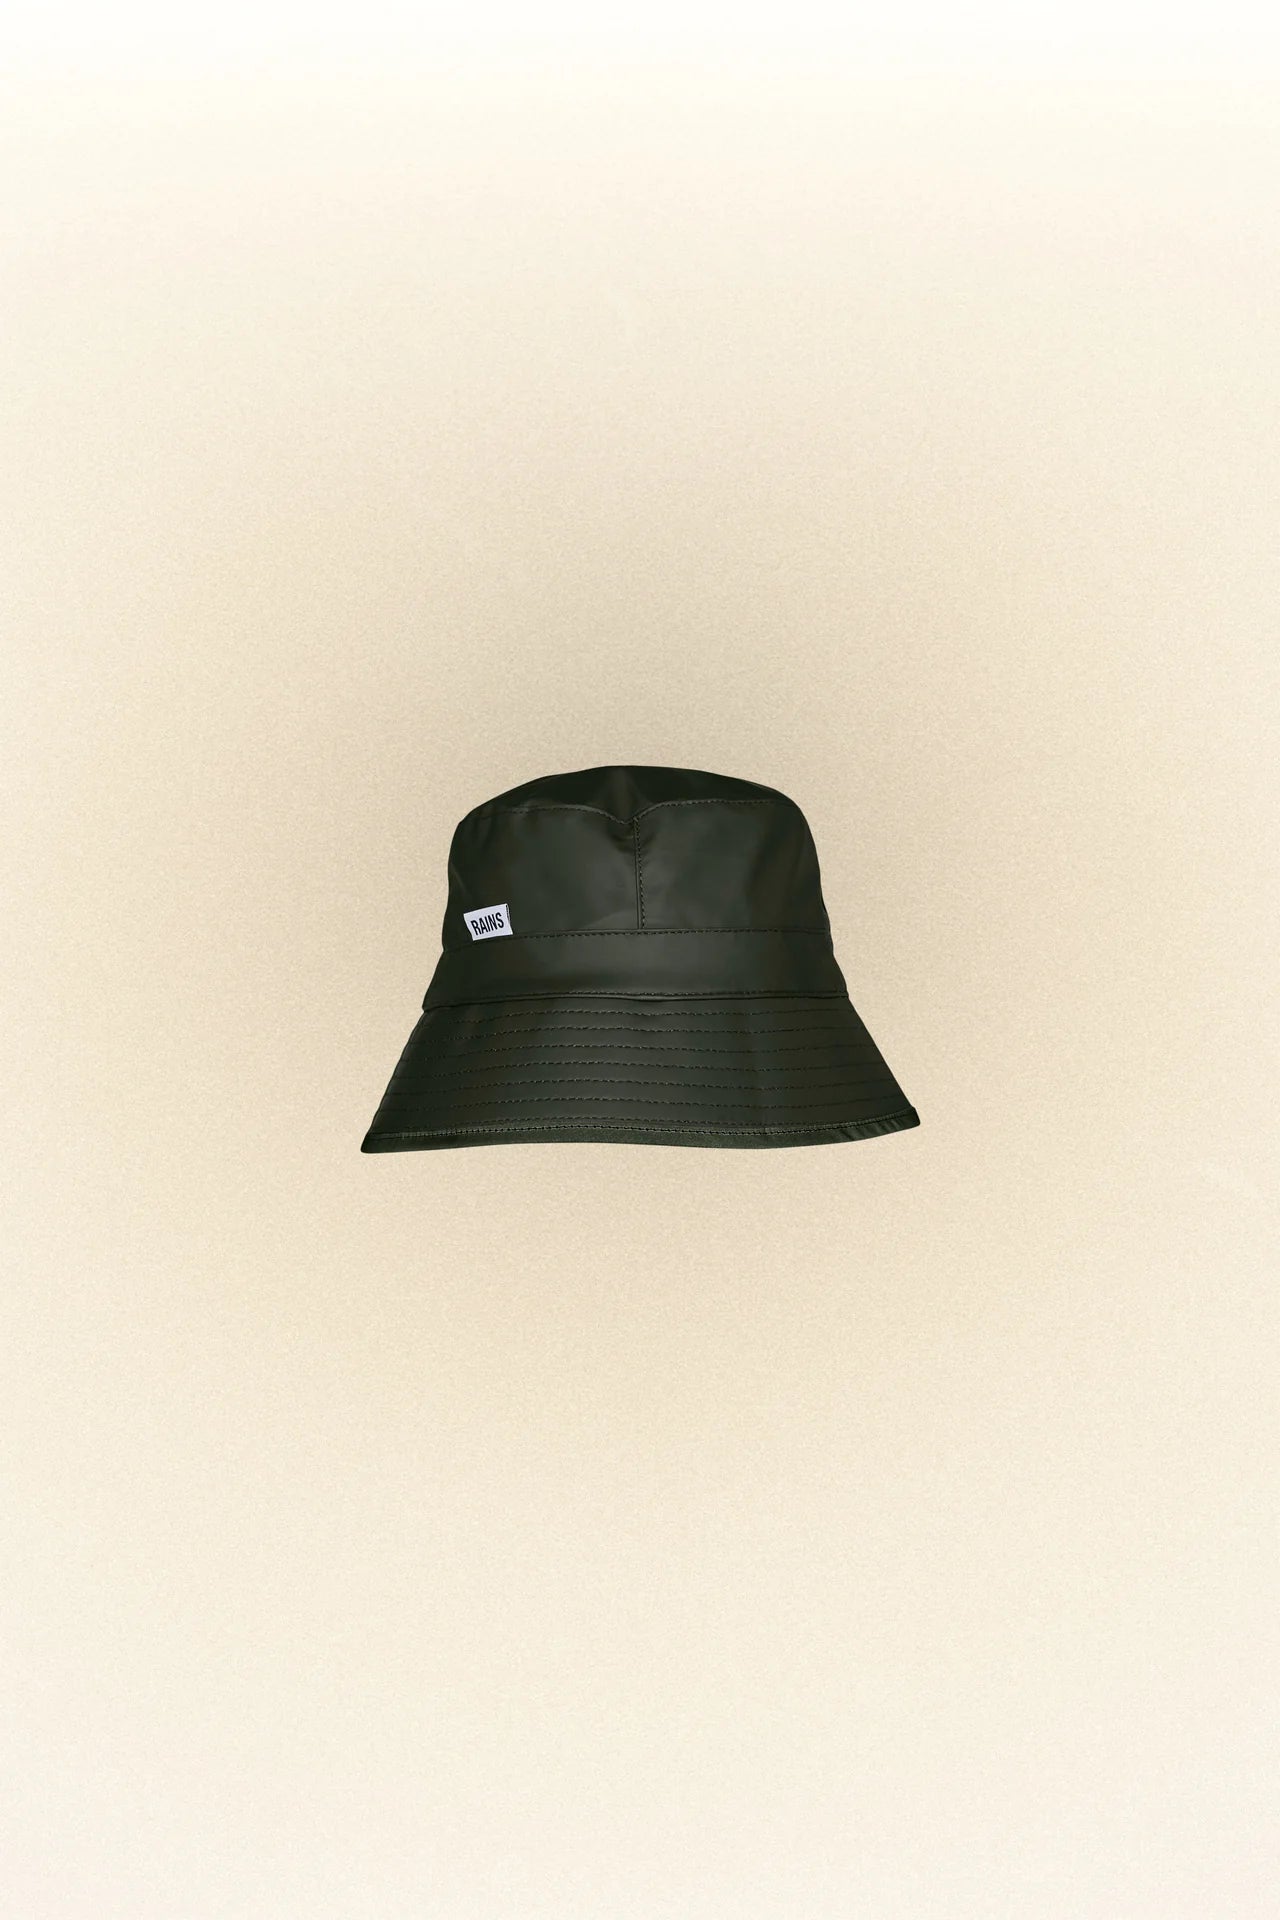 A waterproof Rains bucket hat on a white background.